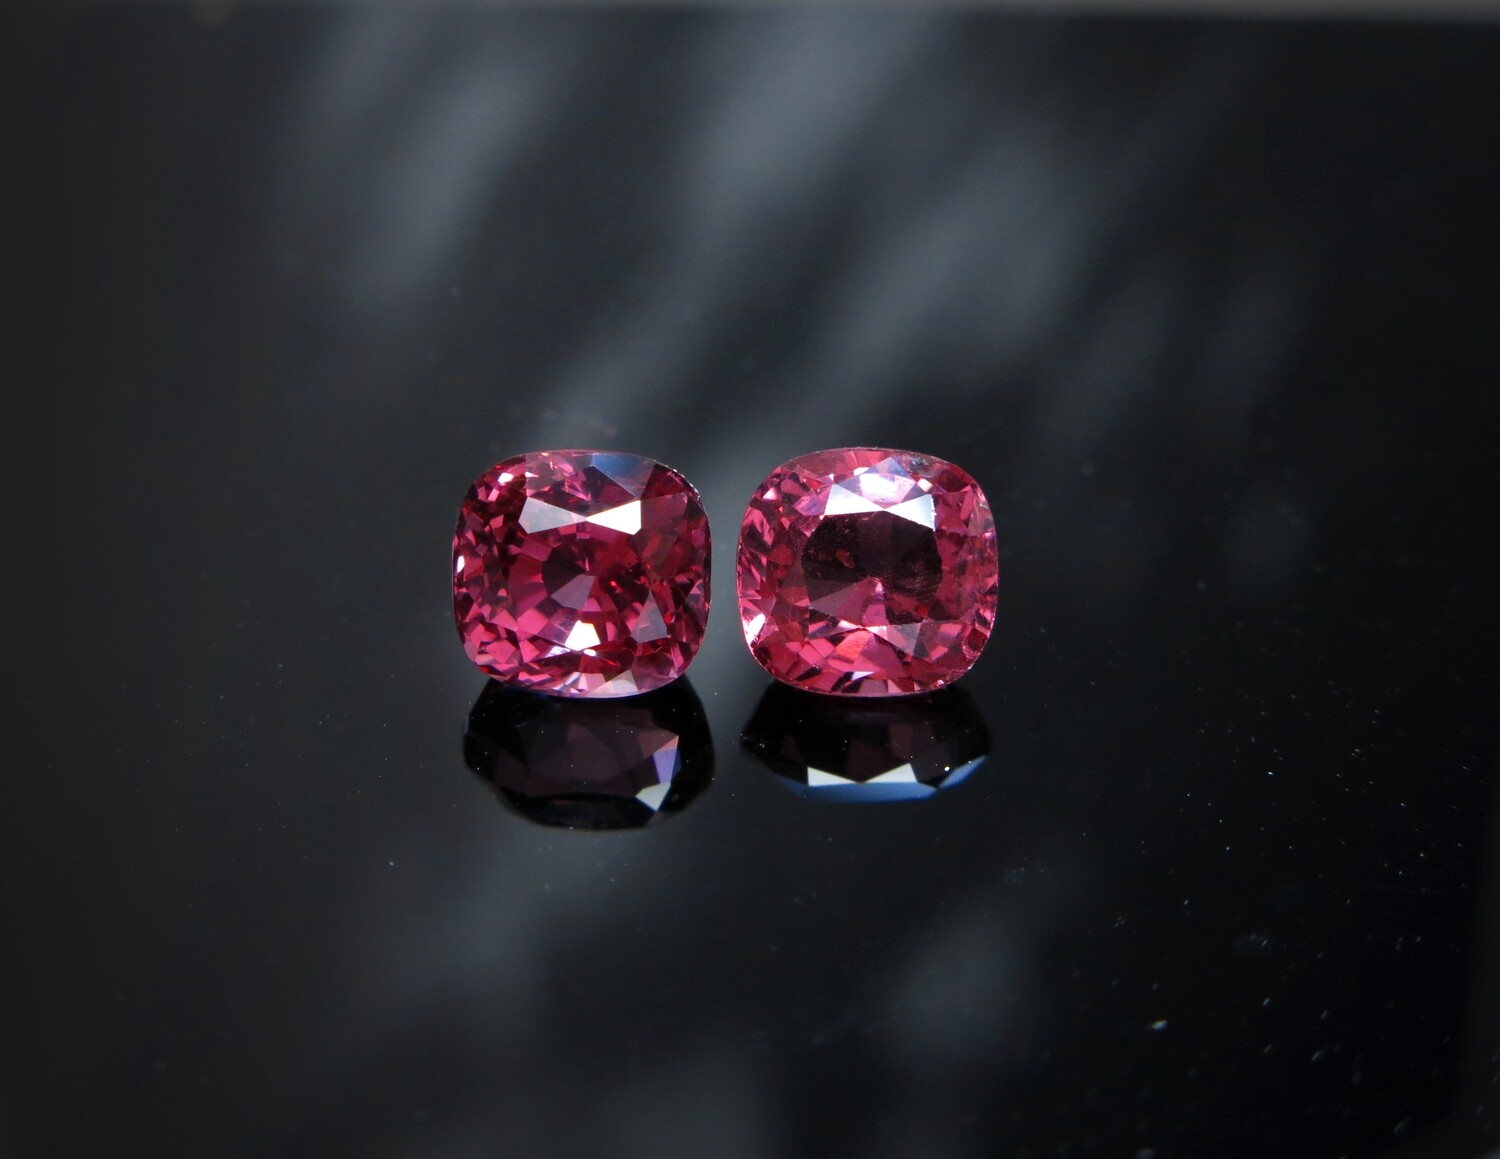 Spinel Cushion cut pair 1.80 ct and 2.28 ct